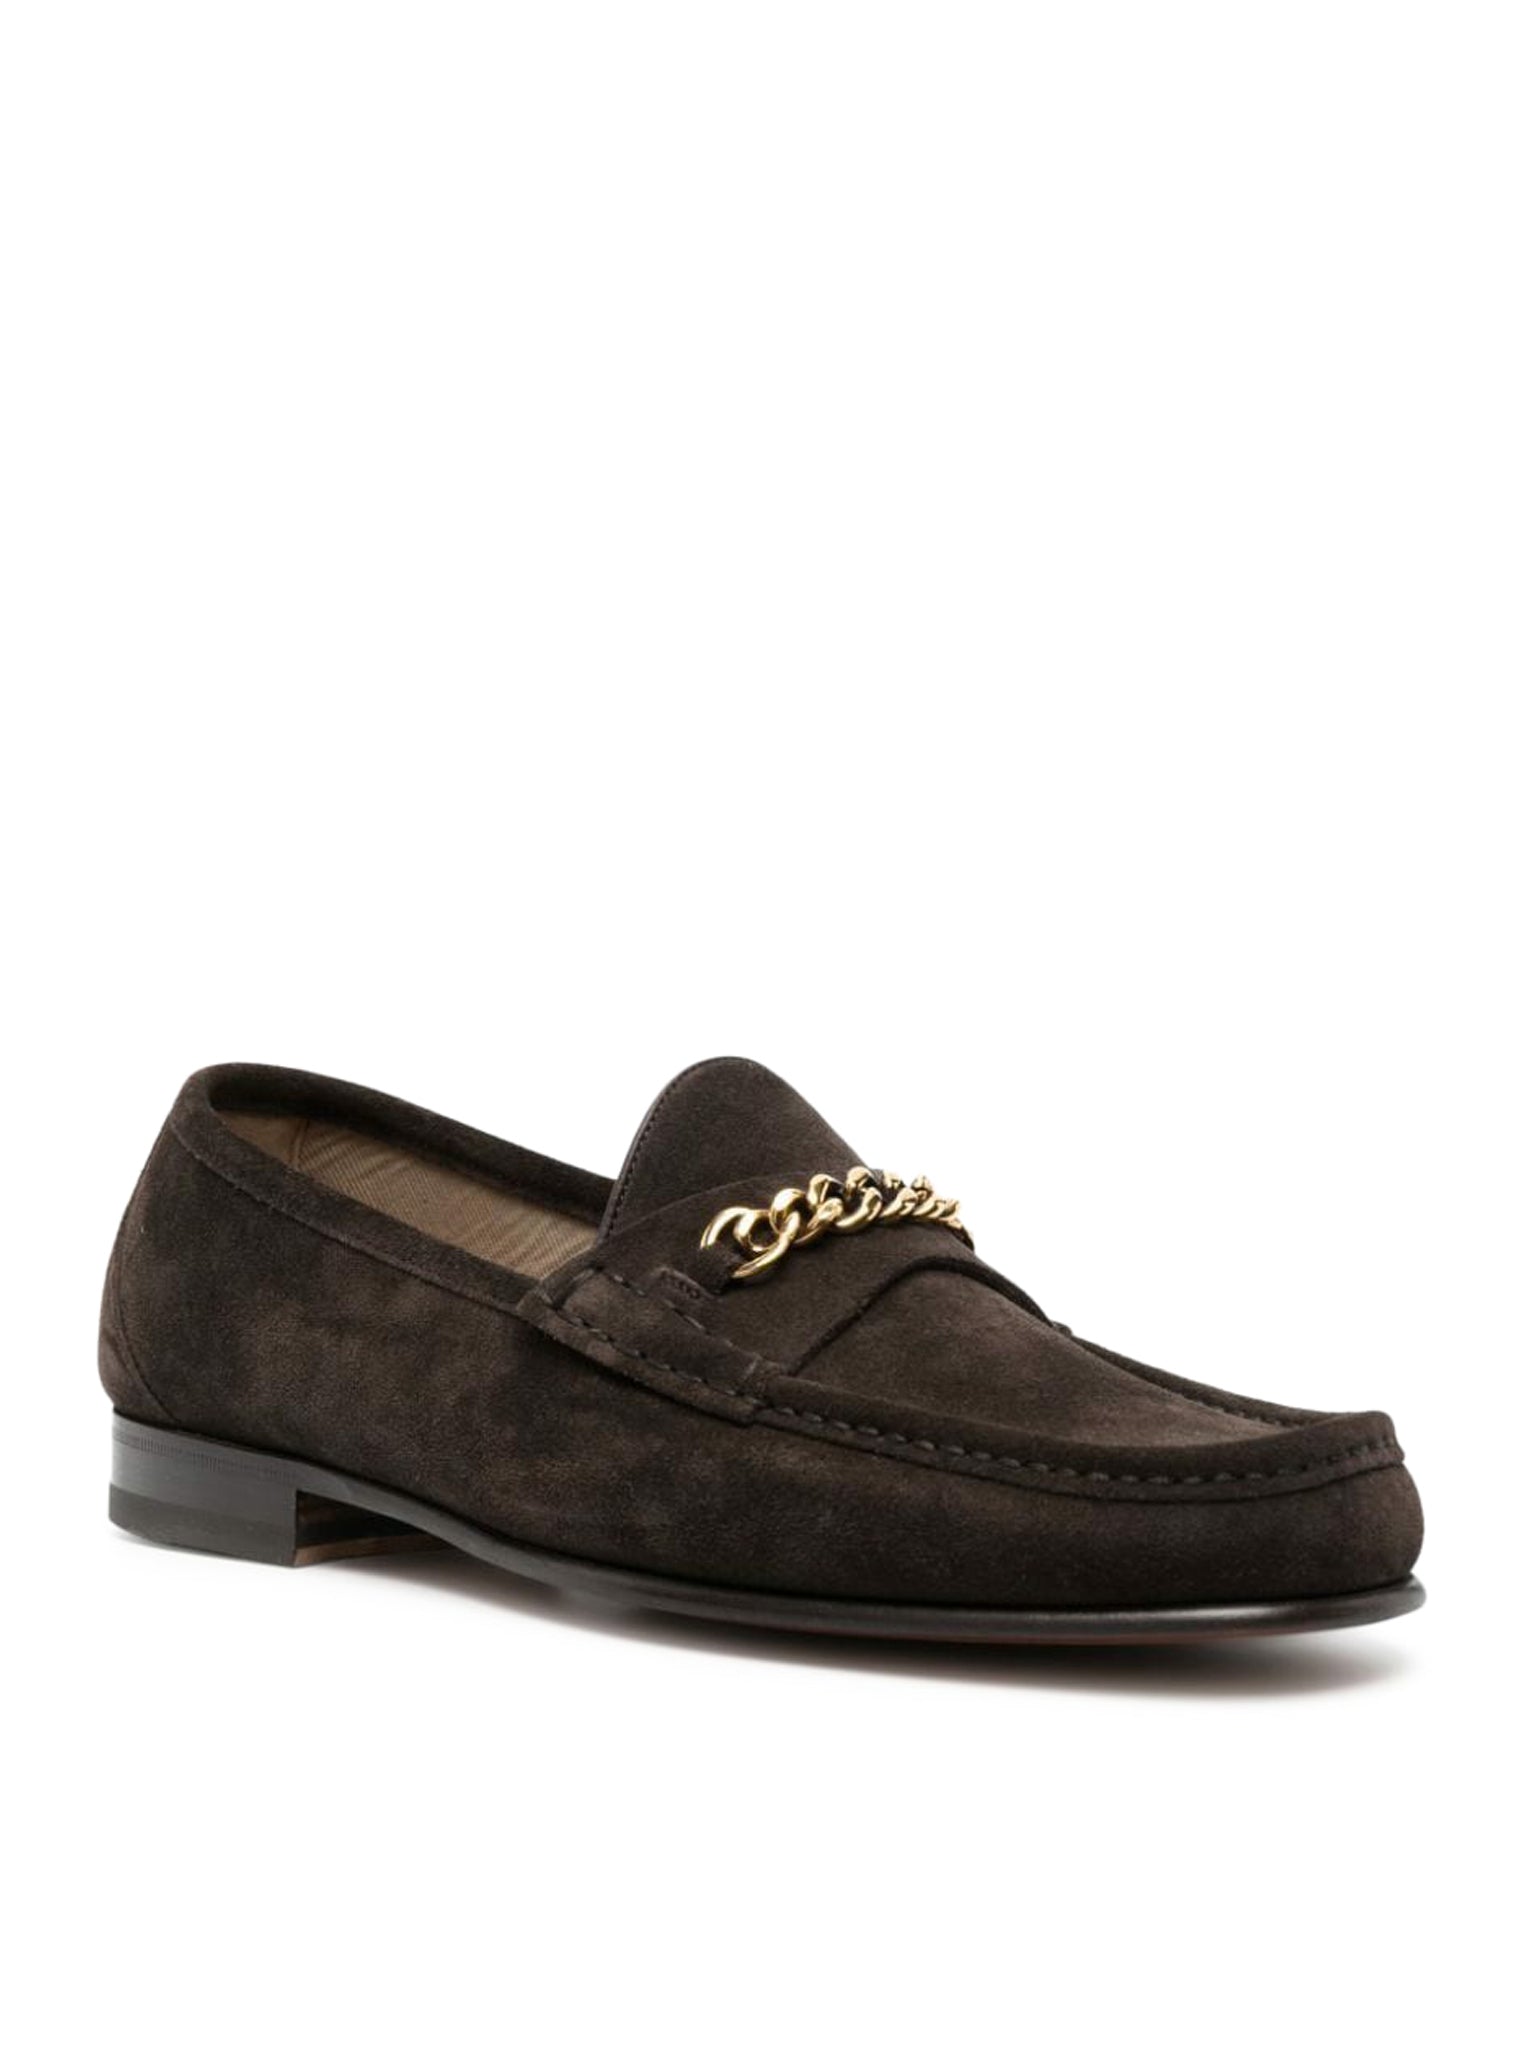 chain suede loafers